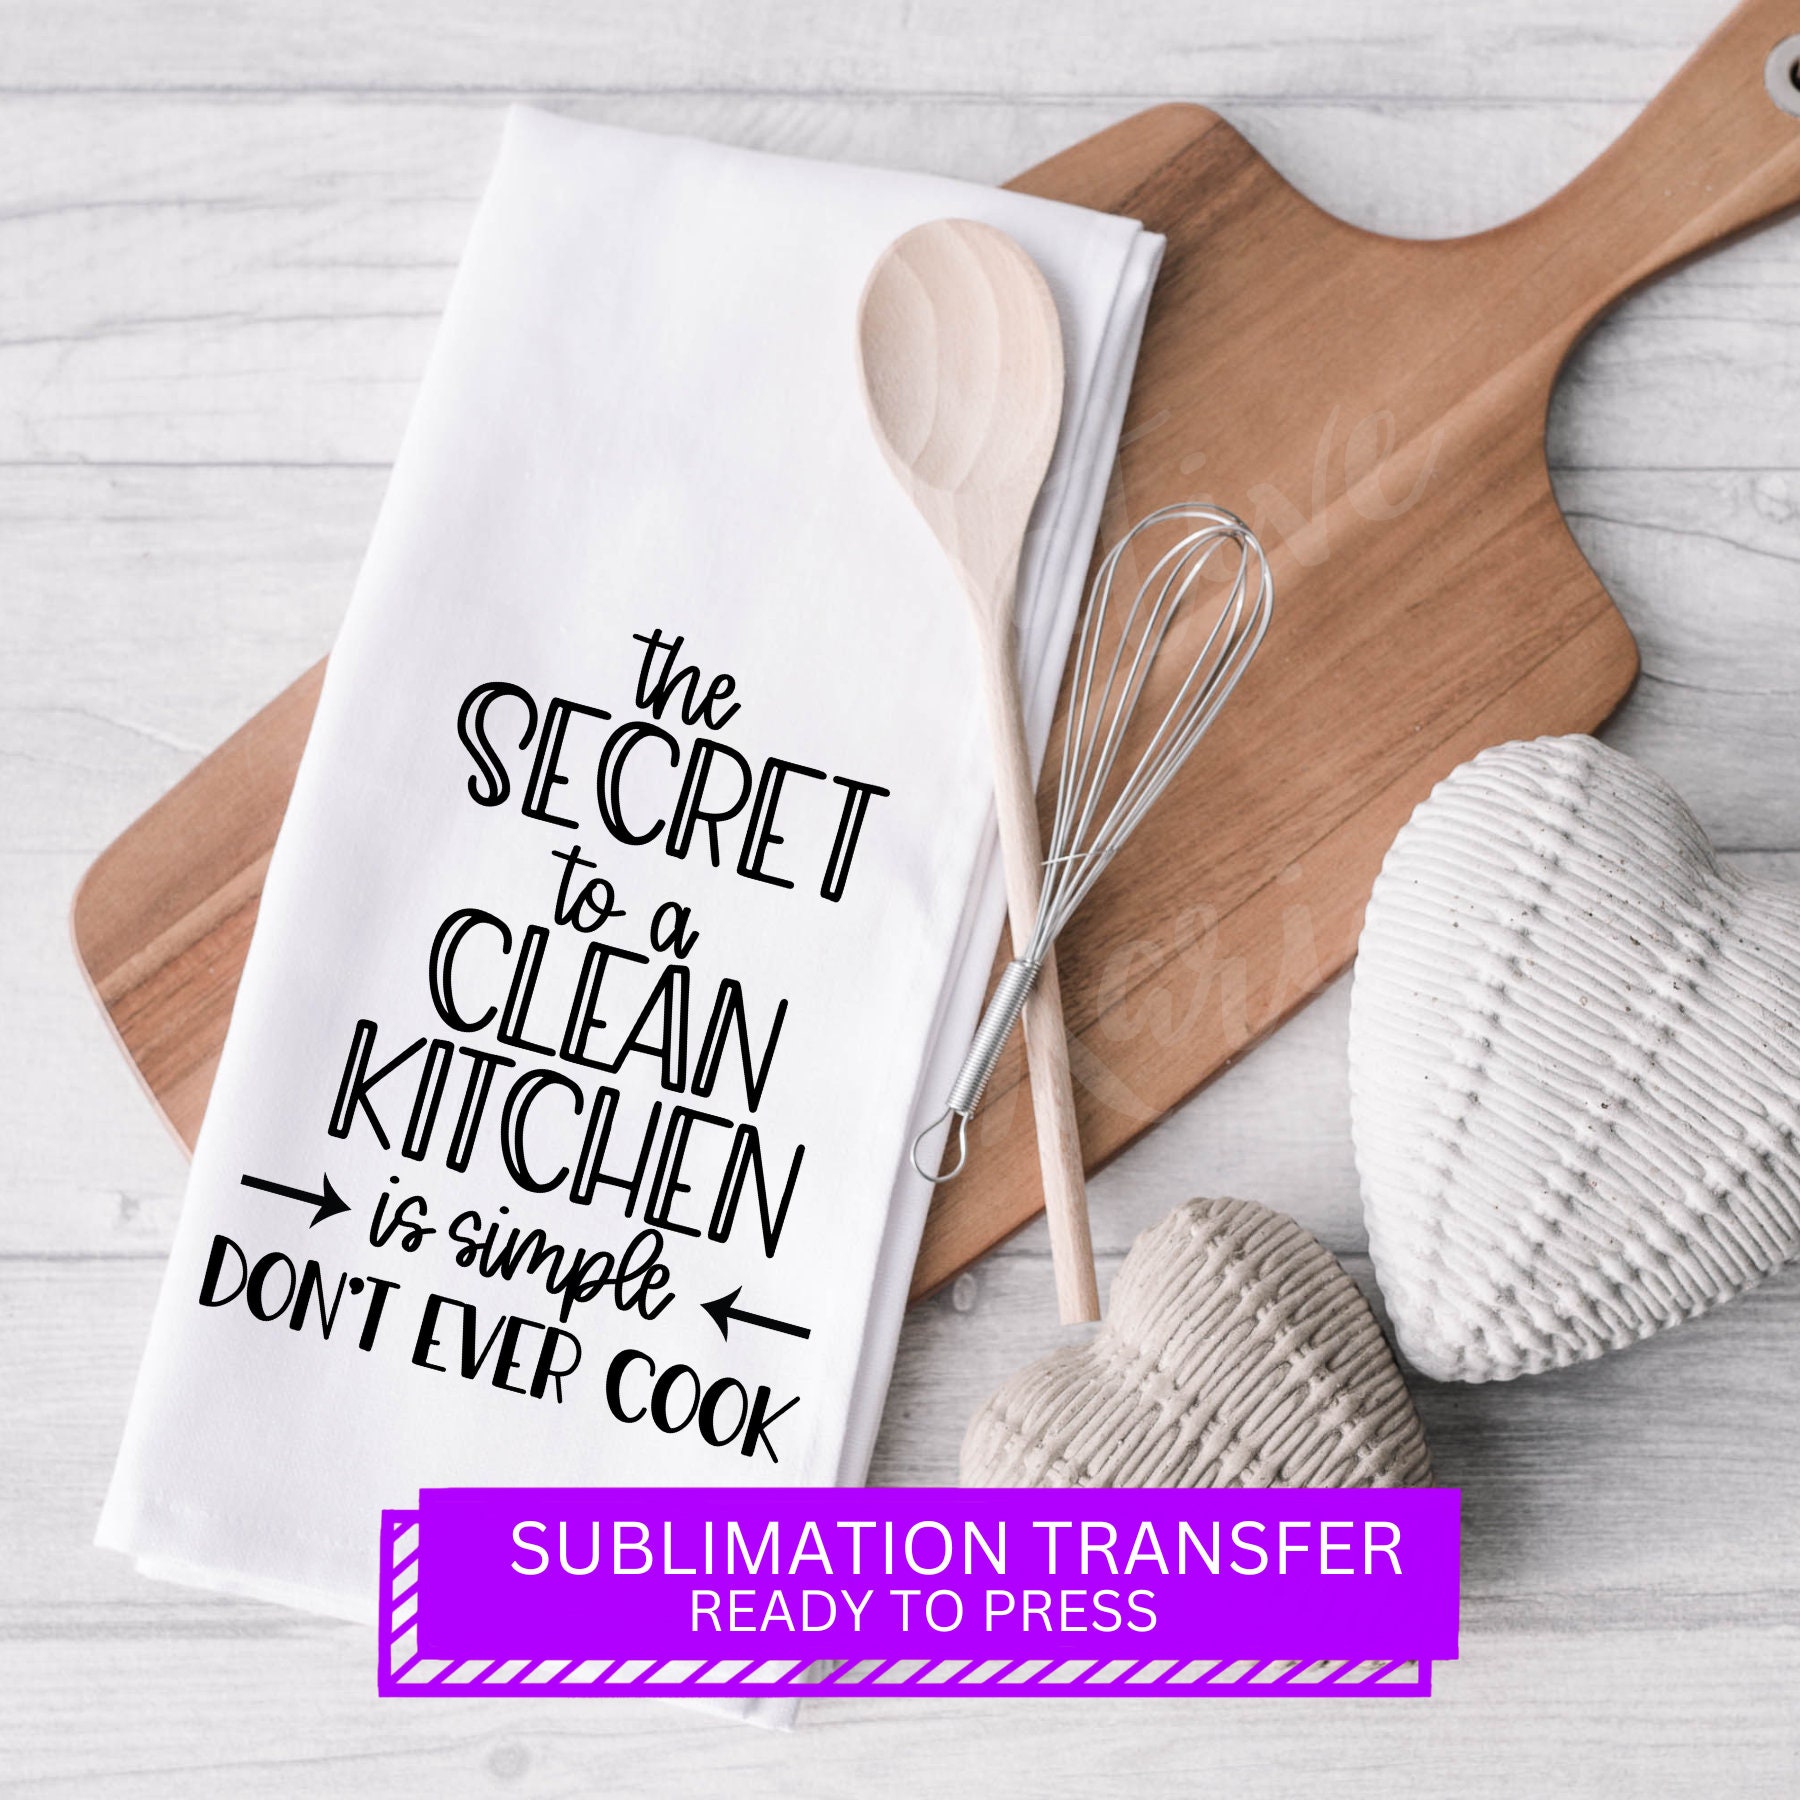 Cute Kitchen Towels Gift Set with Iron-on Vinyl - Crafting in the Rain